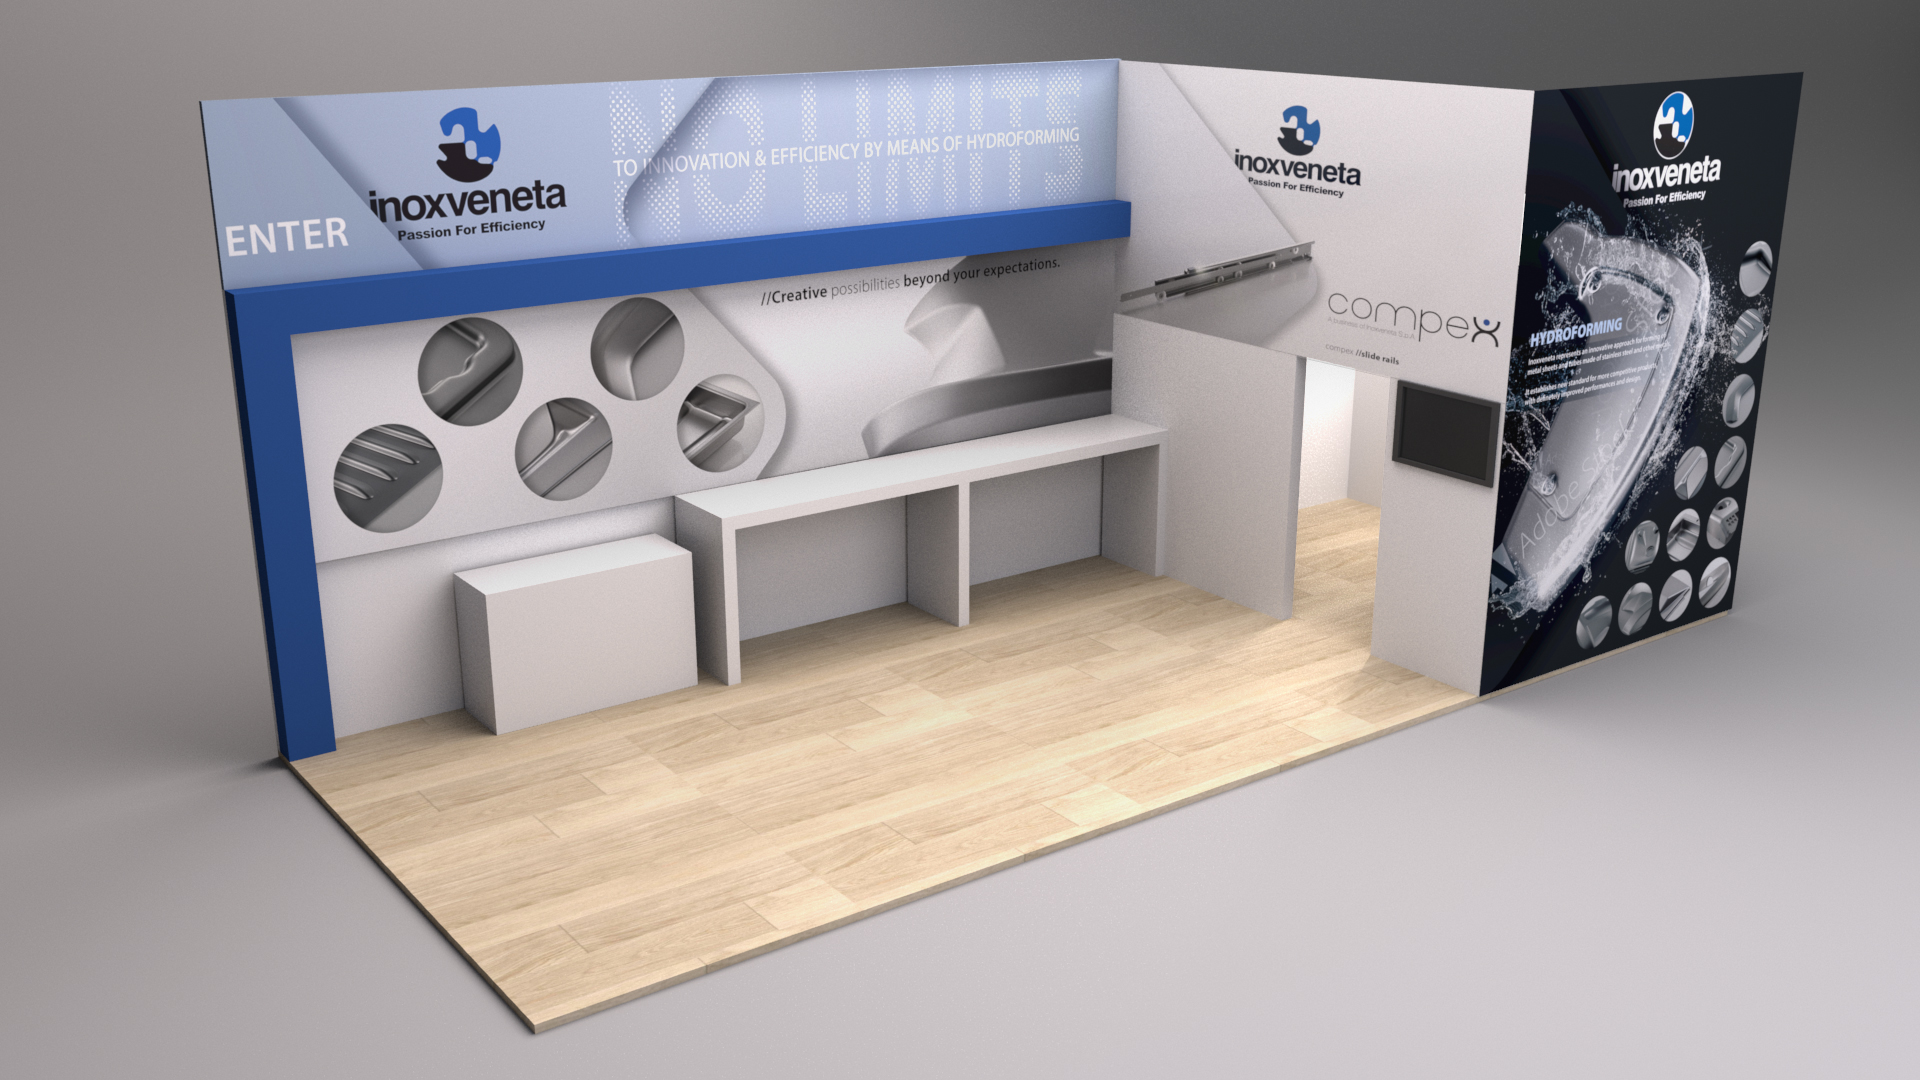 Our stand at the Host 2019 fair in Milan (18-22 October)